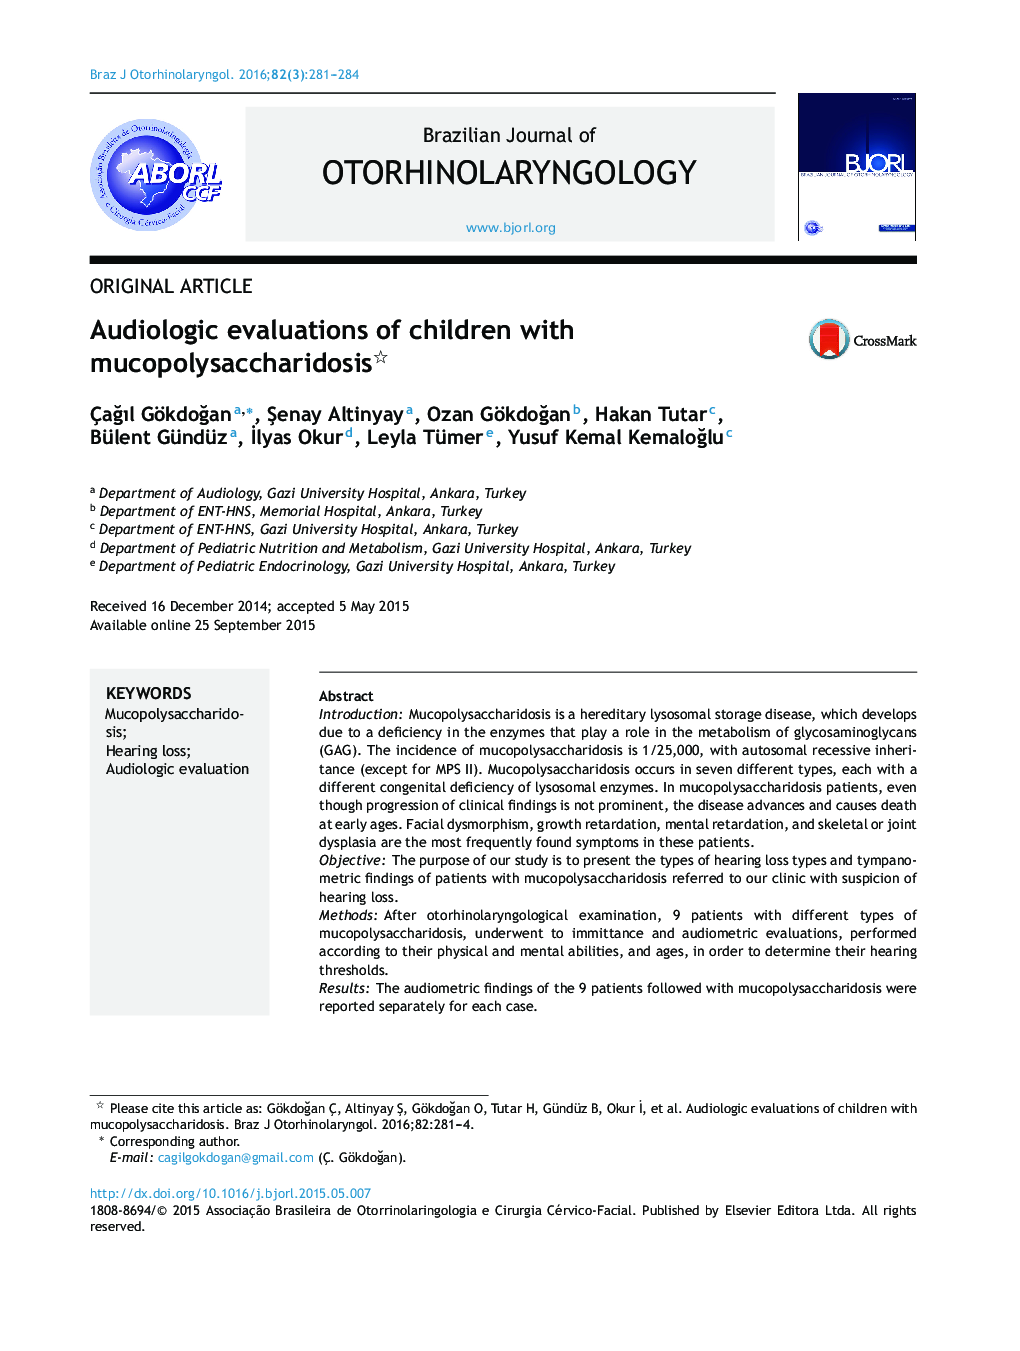 Audiologic evaluations of children with mucopolysaccharidosis 